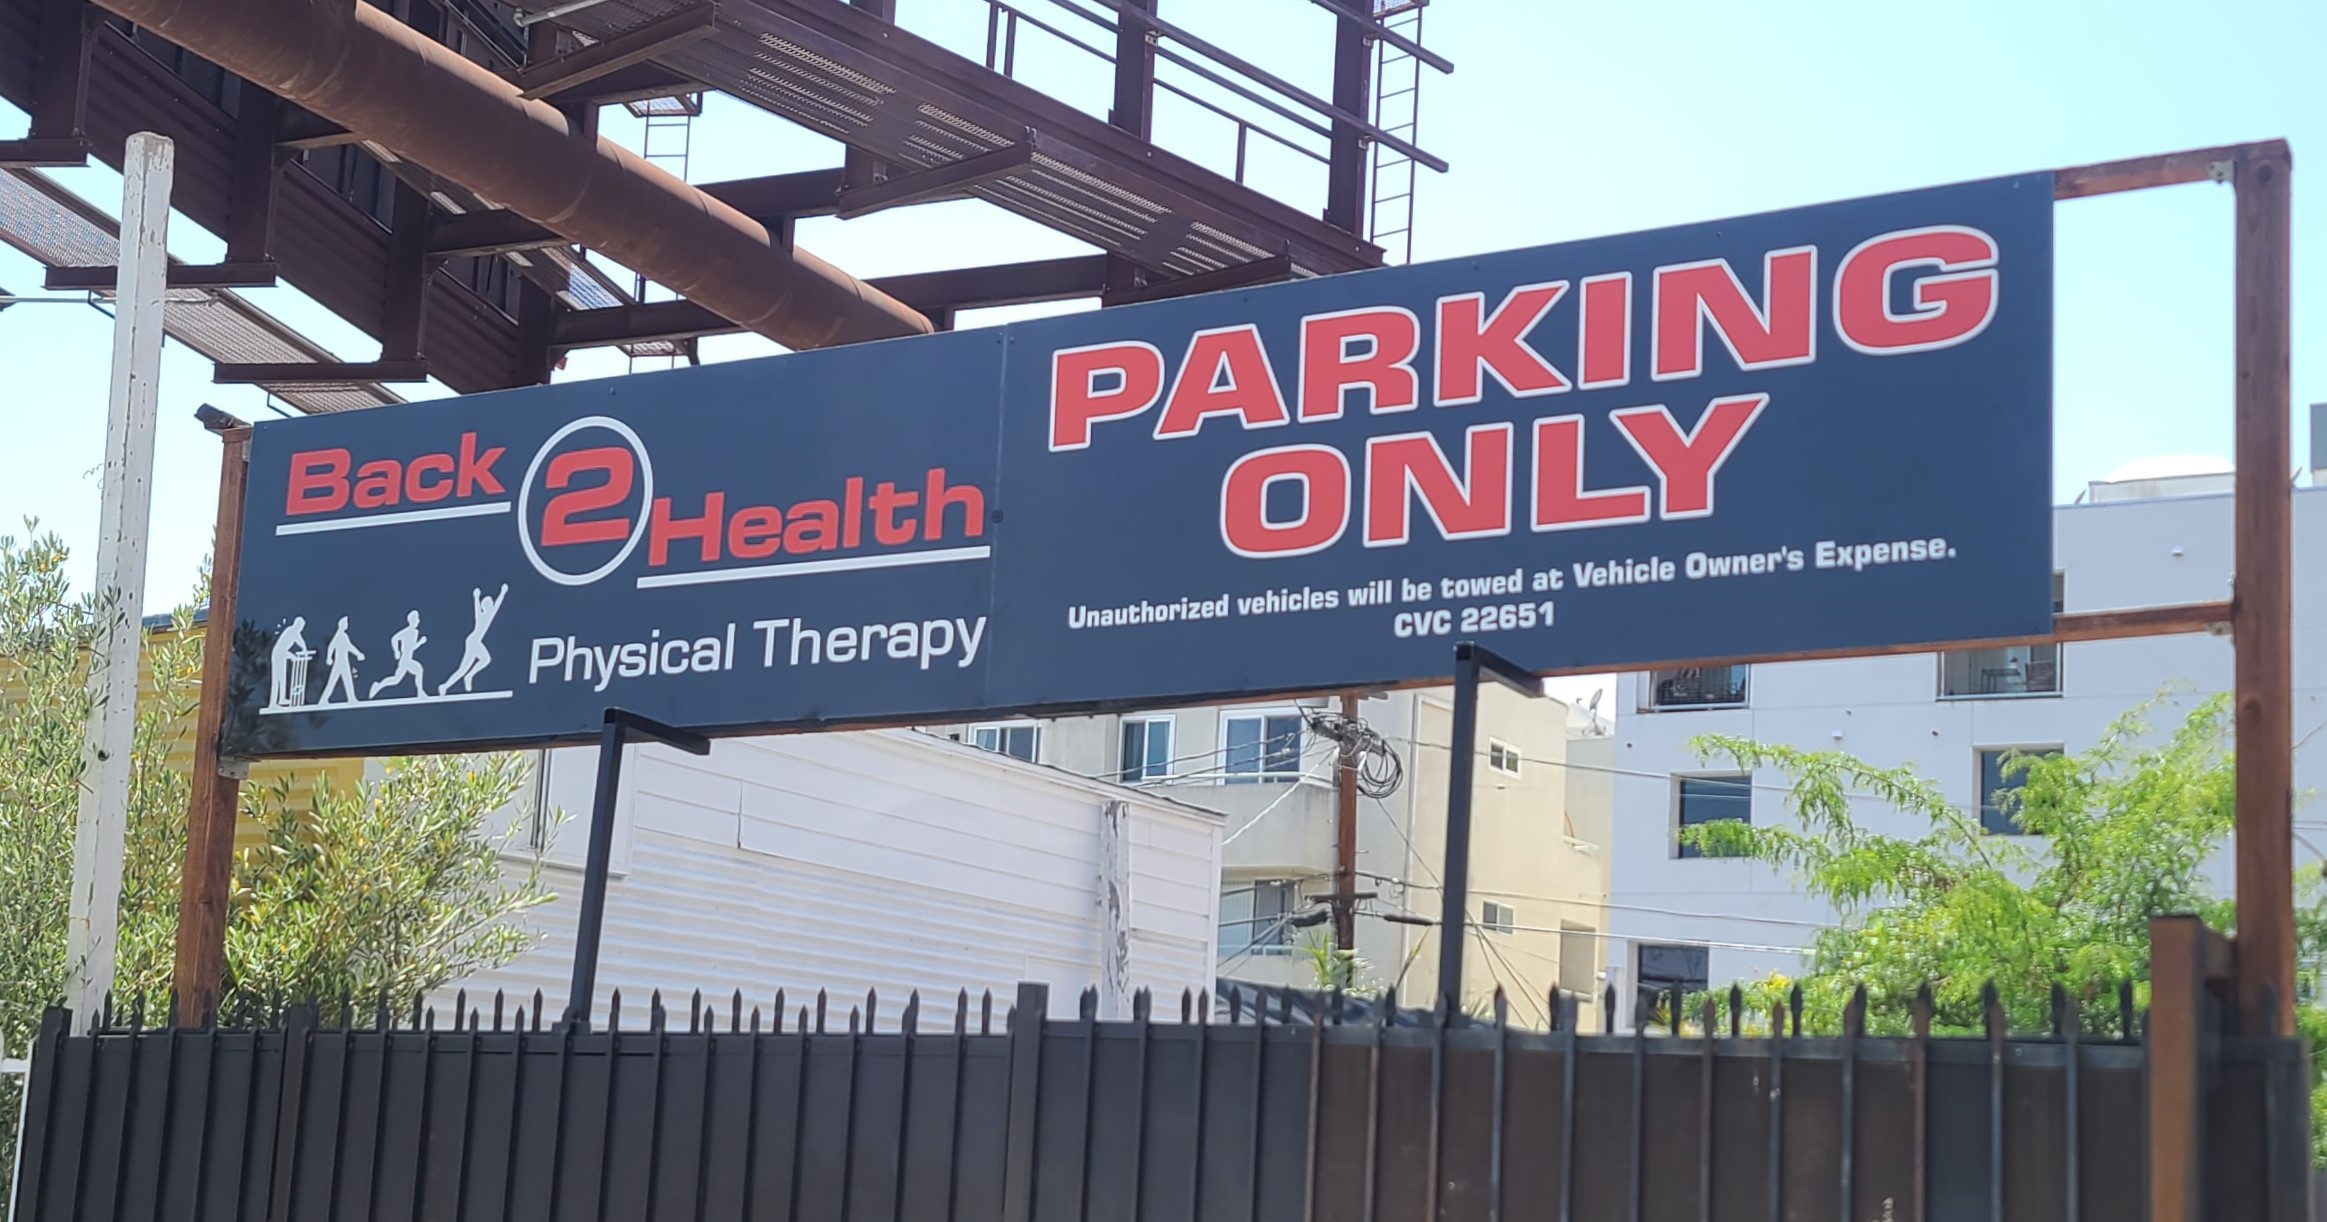 You are currently viewing MaxMetal Parking Lot Sign for Back 2 Health Physical Therapy in Los Angeles